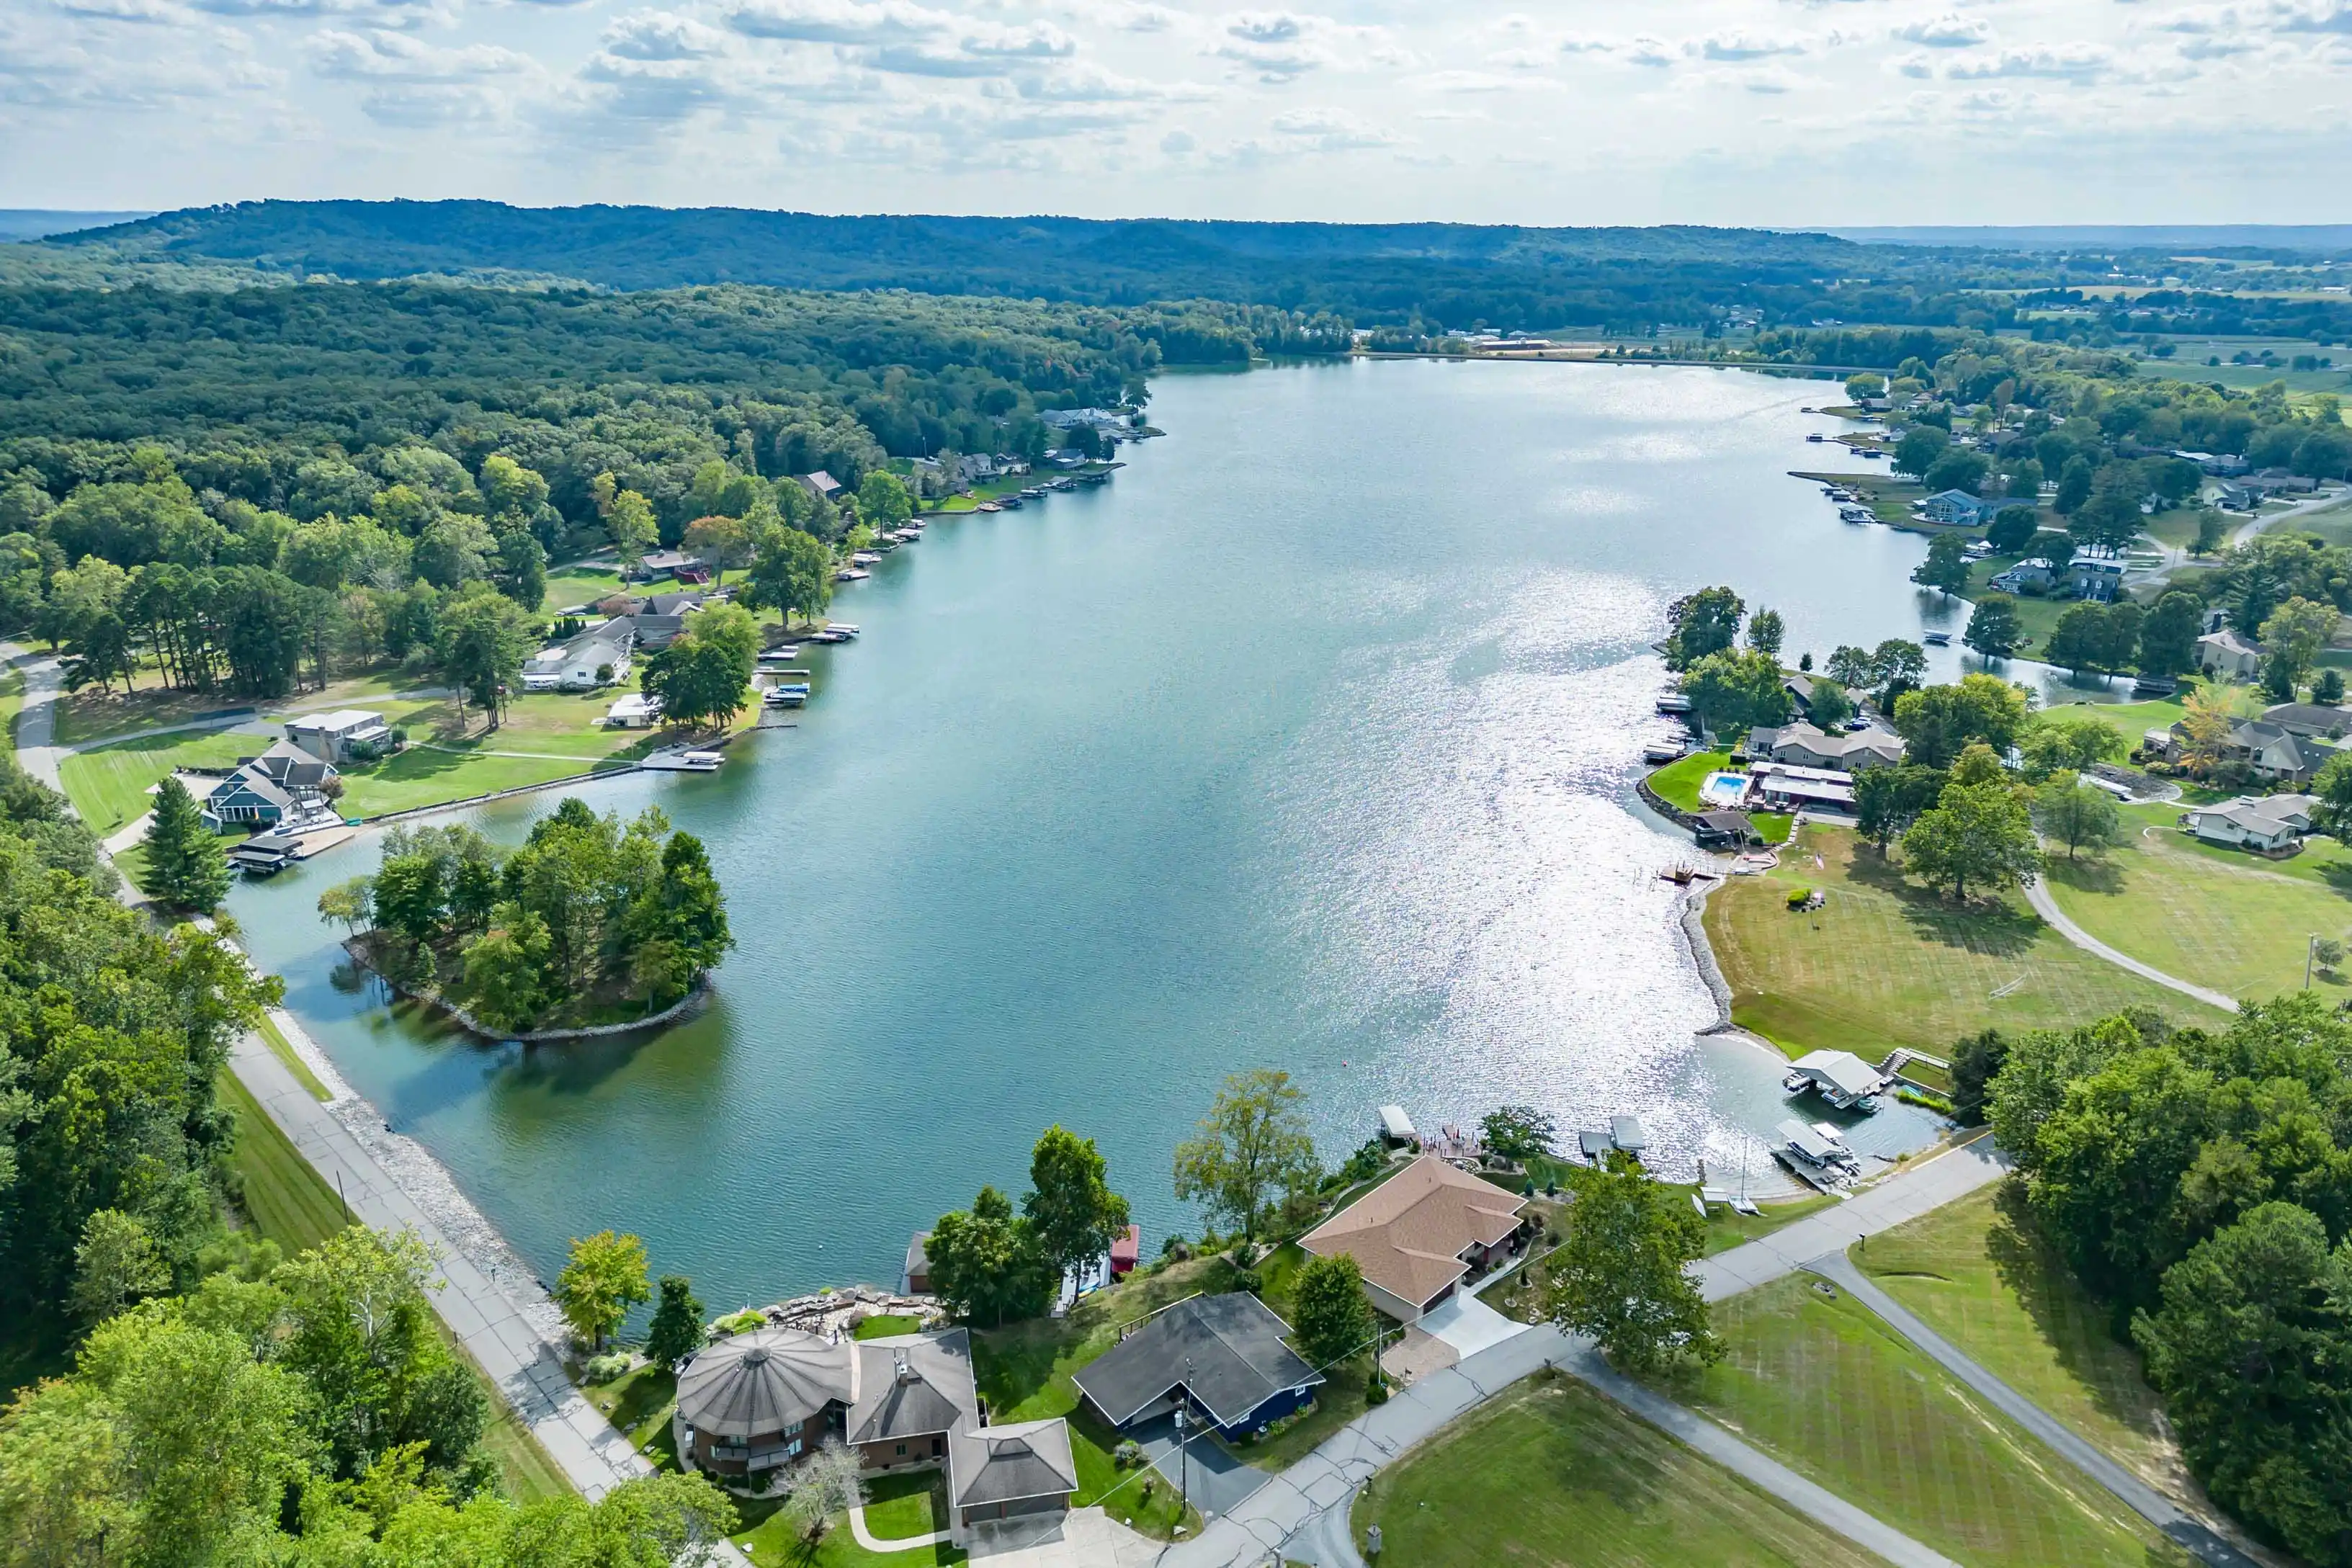 Aerial view of a serene lake surrounded by greenery with residential houses along the shoreline, a small island in the center, and distant hills under a cloudy sky.